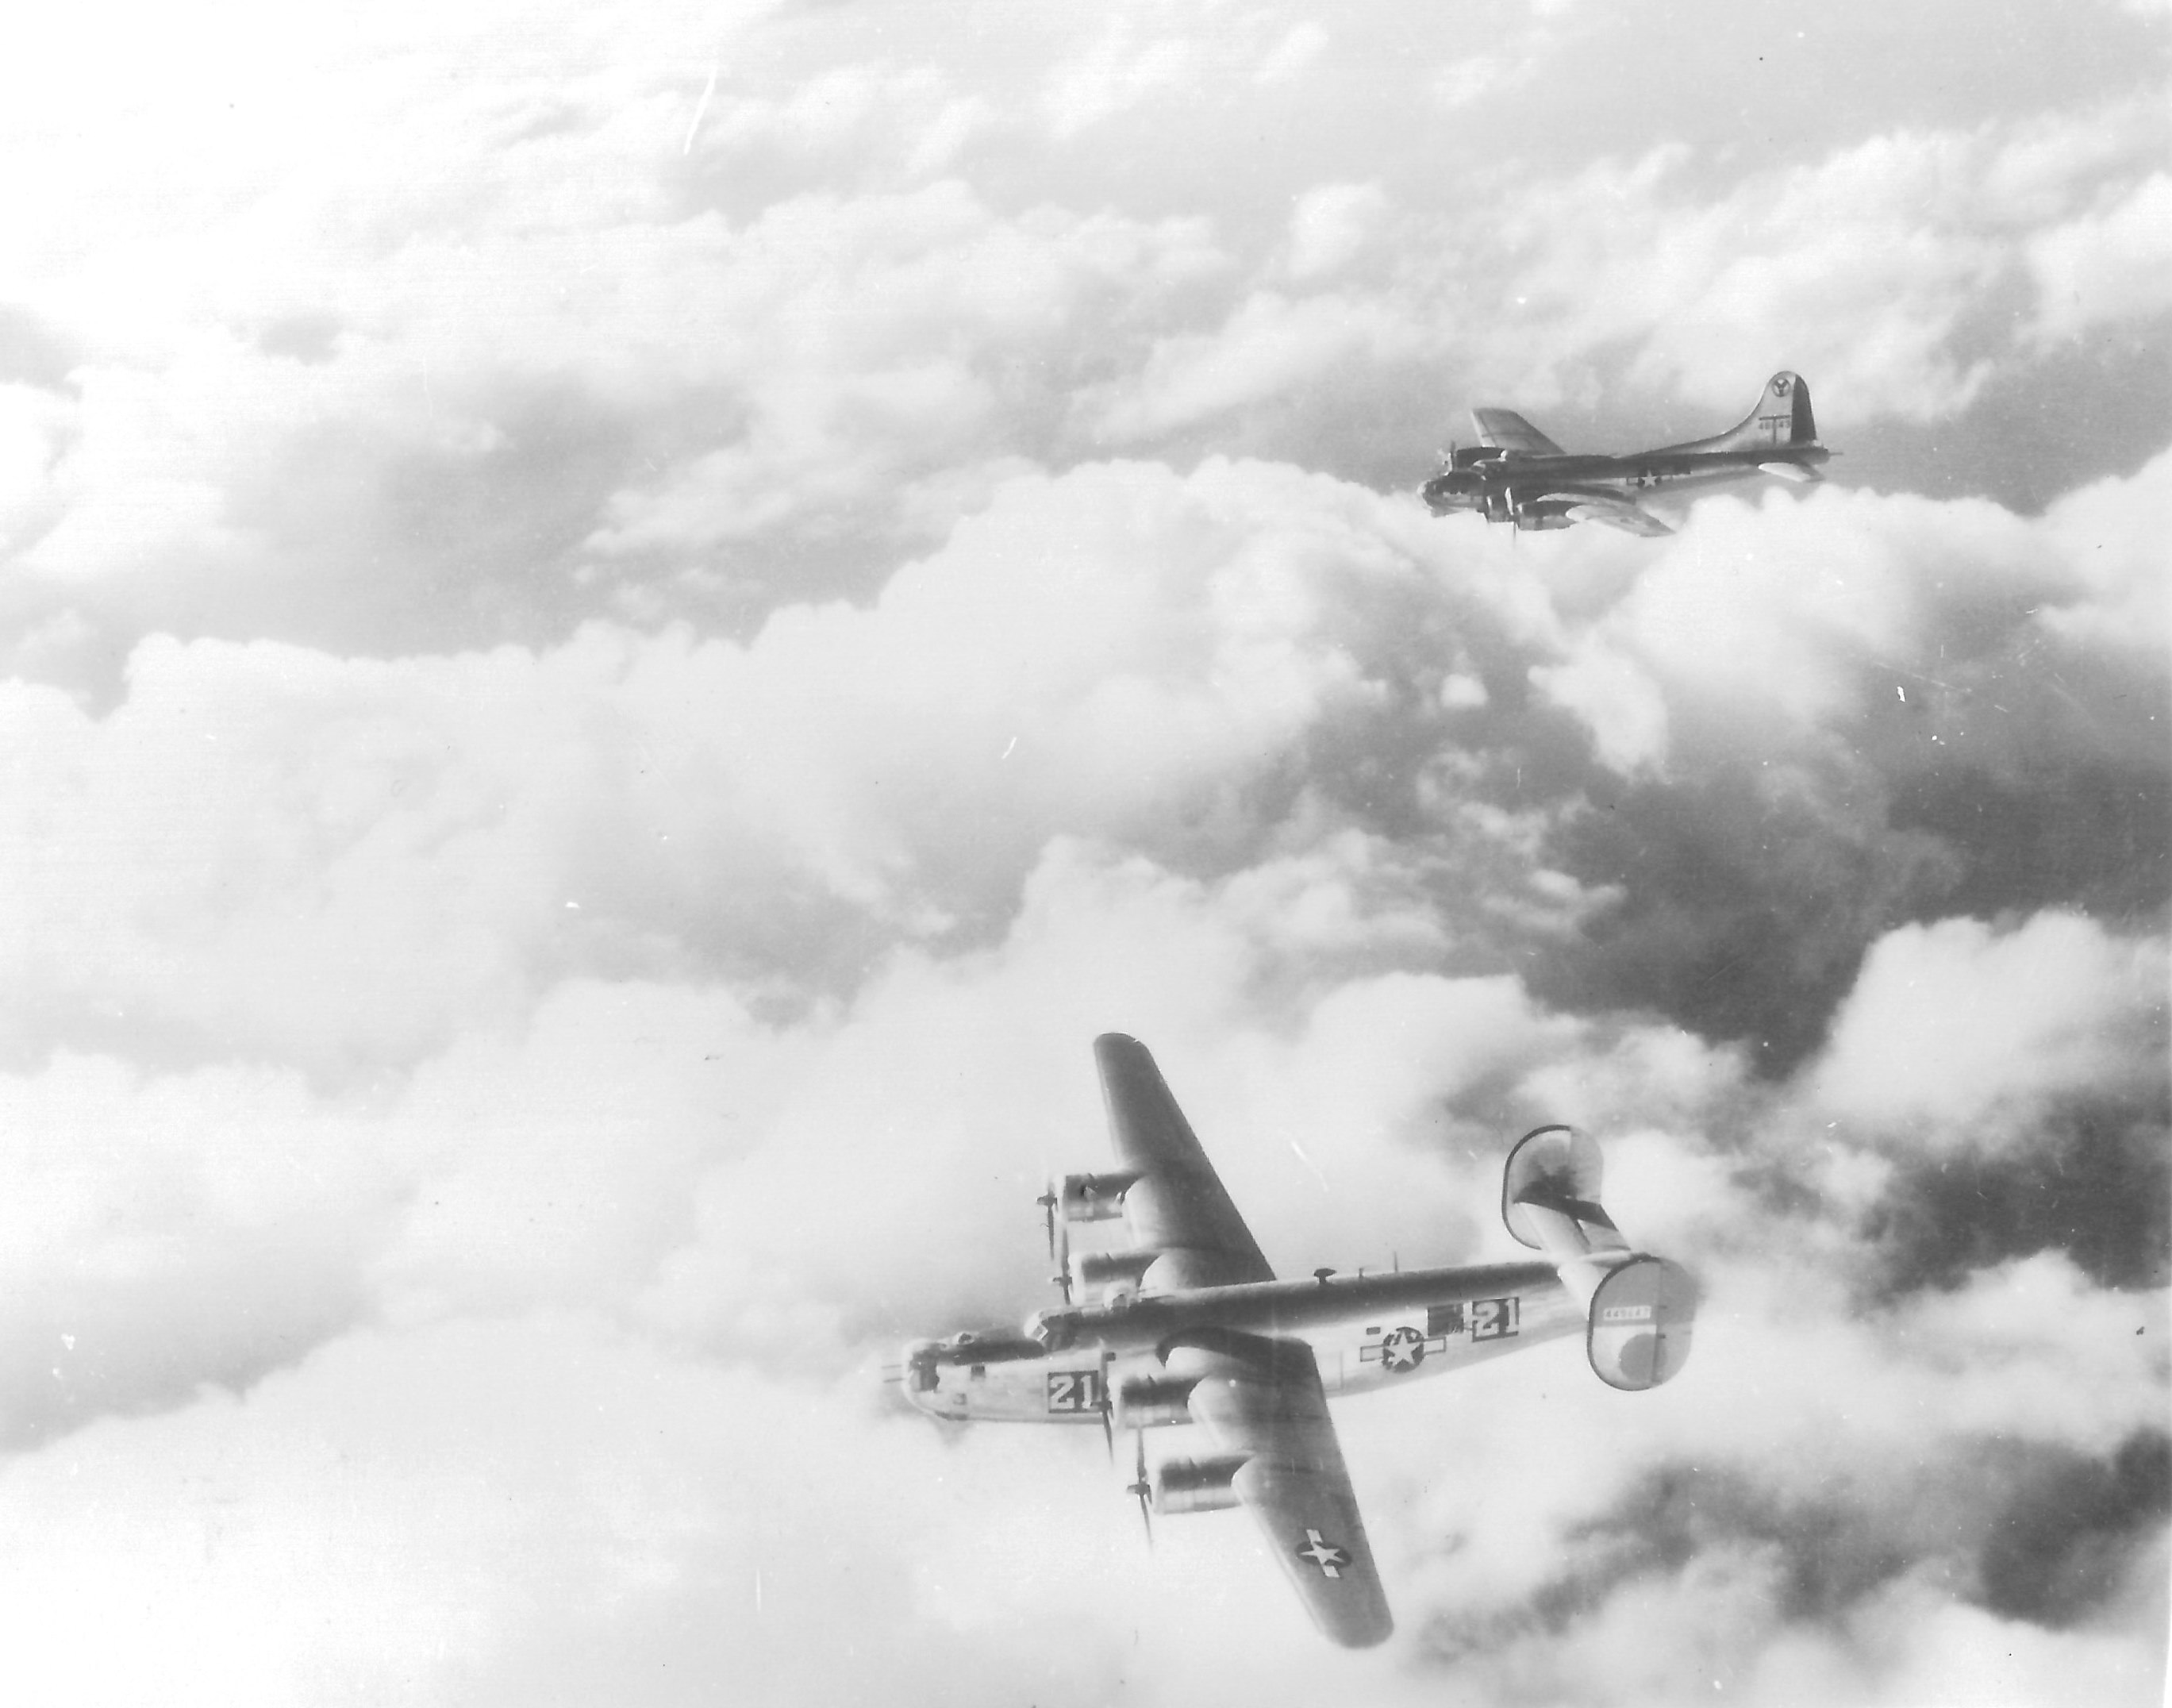 A B-17G Fortress with the 96th Bomb Squadron joining up with a formation of B-24 Liberators from the 451st Bomb Group over Italy, 1944. The Liberator is a B-24L with the 724th Bomb Squadron.